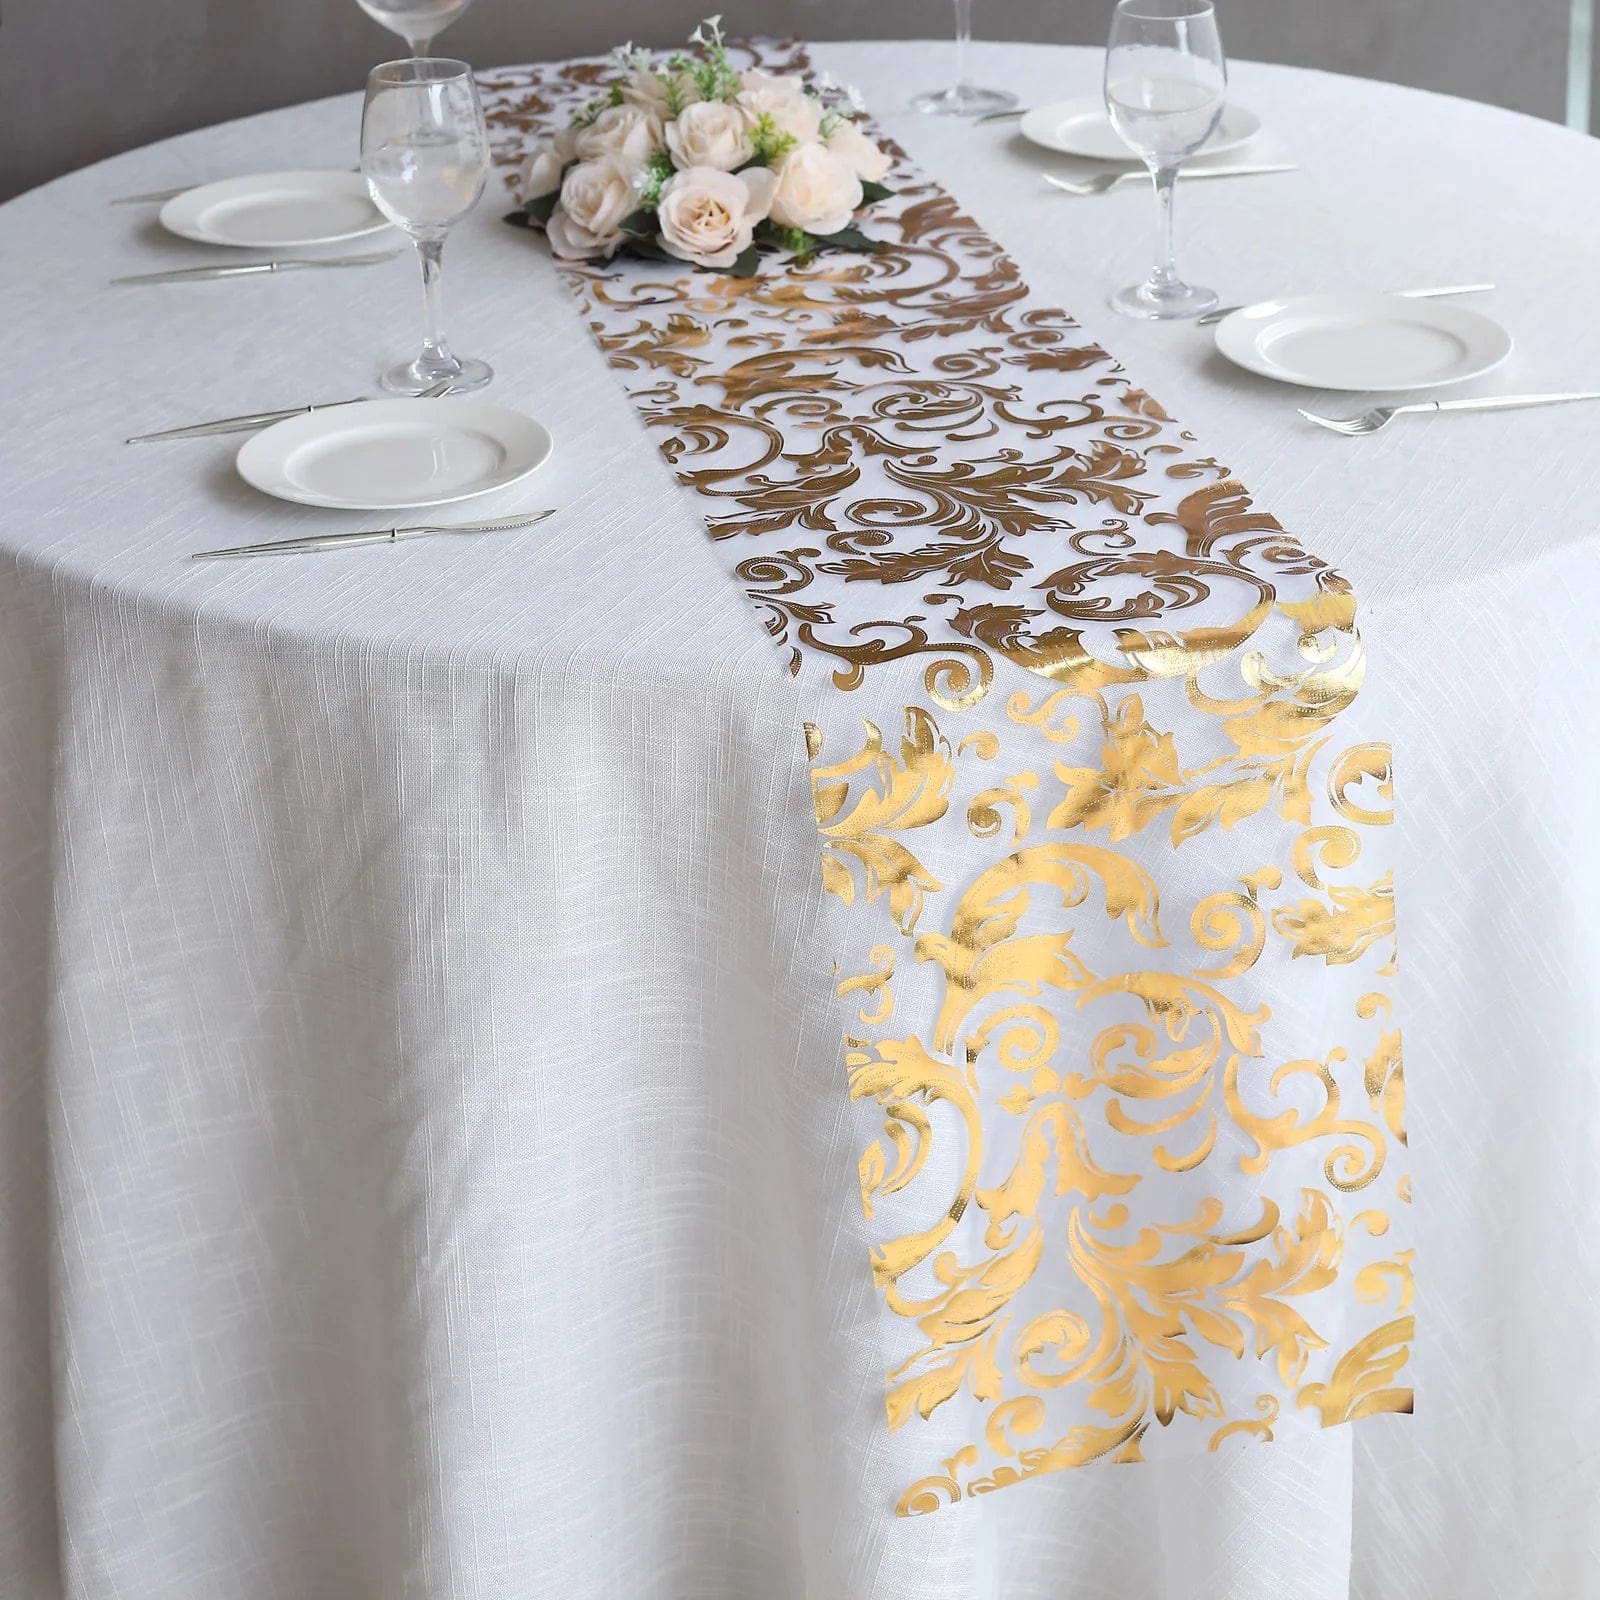 12x108 in Sheer Organza Table Runner with Metallic Swirl Floral Design